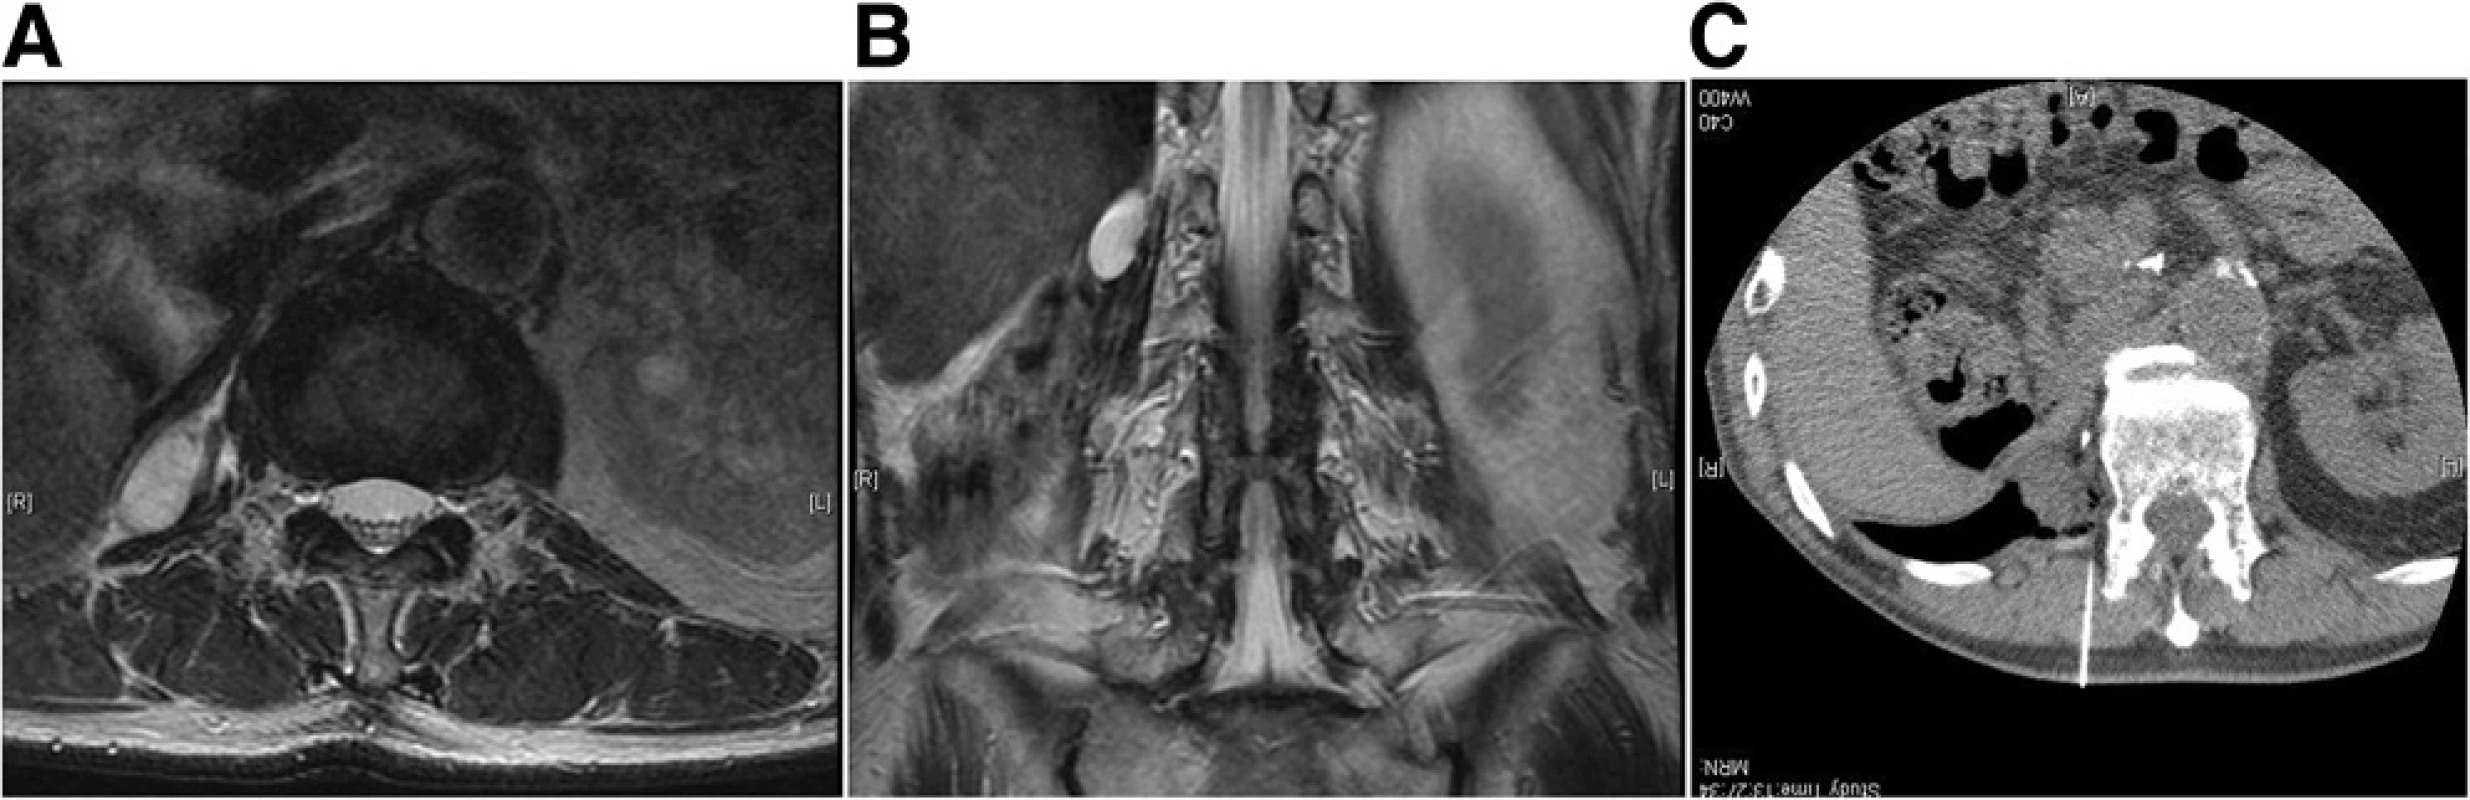 Locally recurrent, 3 cm, dedifferentiated liposarcoma in the retroperitoneal paravertebral region 1 year after initial surgery (a, b). c Under CT guidance, air was transperitoneally infused to displace the bowel just adjacent to the recurrent tumor